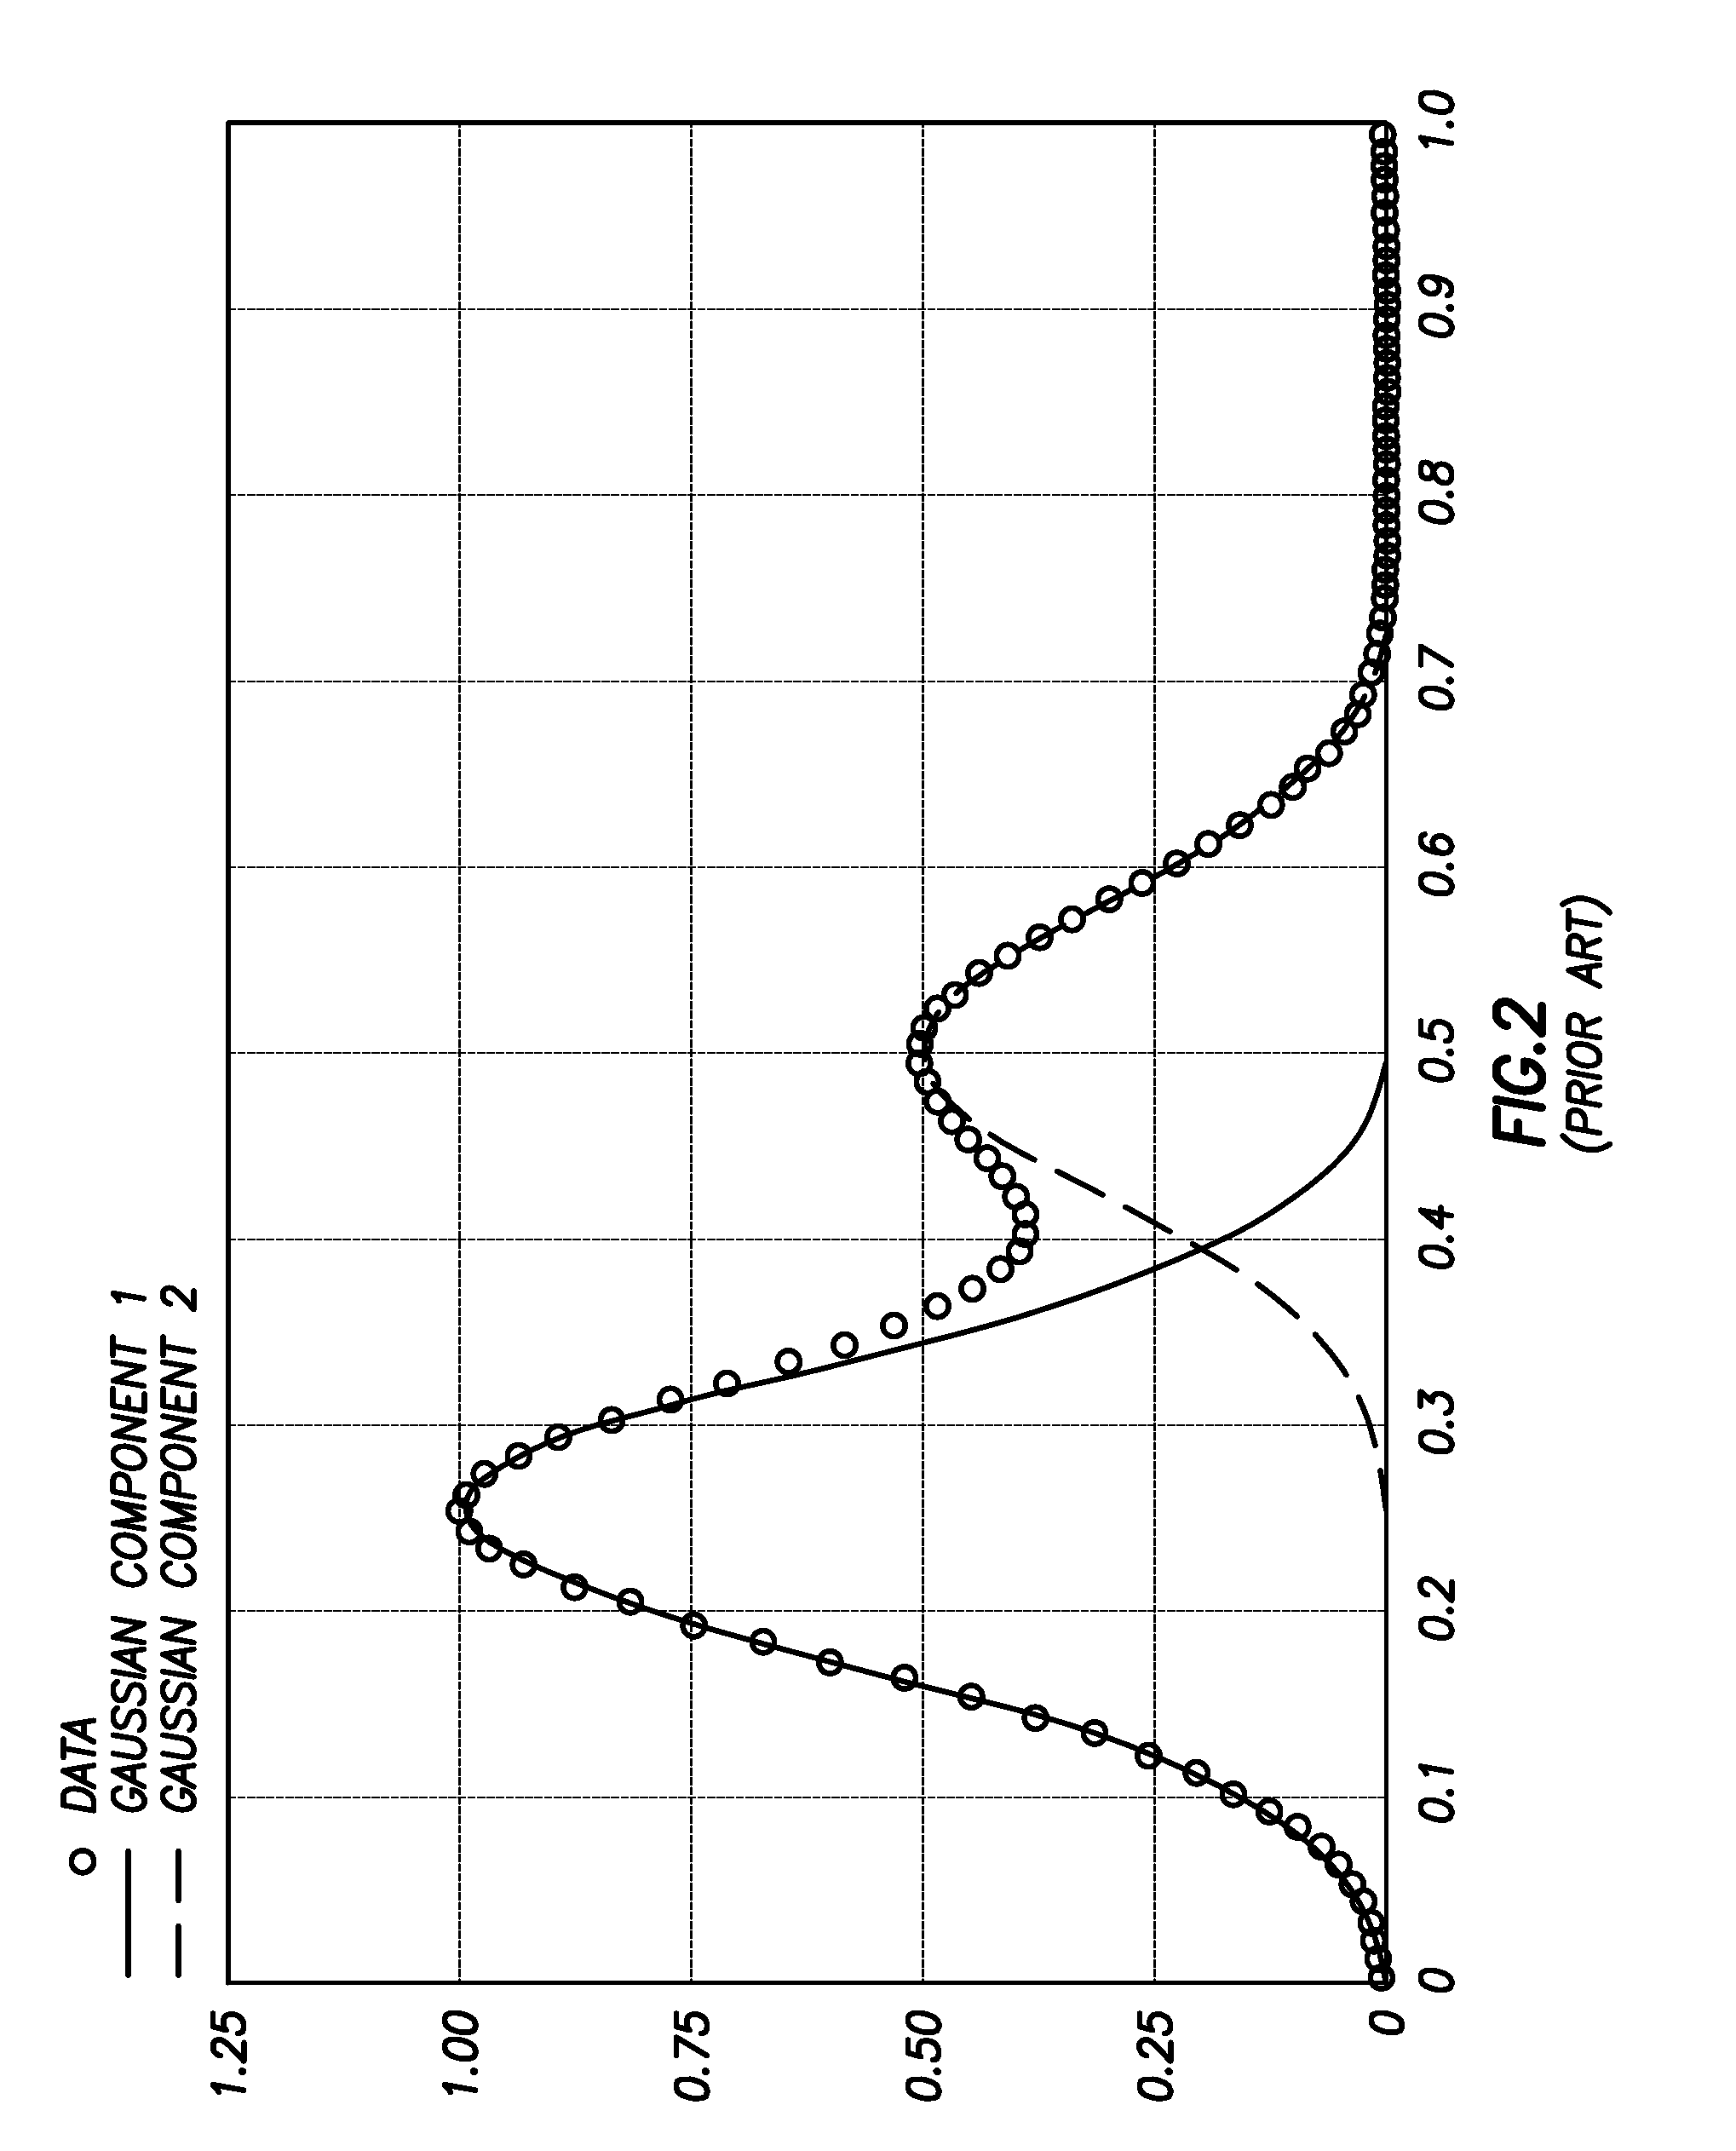 Methodology and Application of Multimodal Decomposition of a Composite Distribution